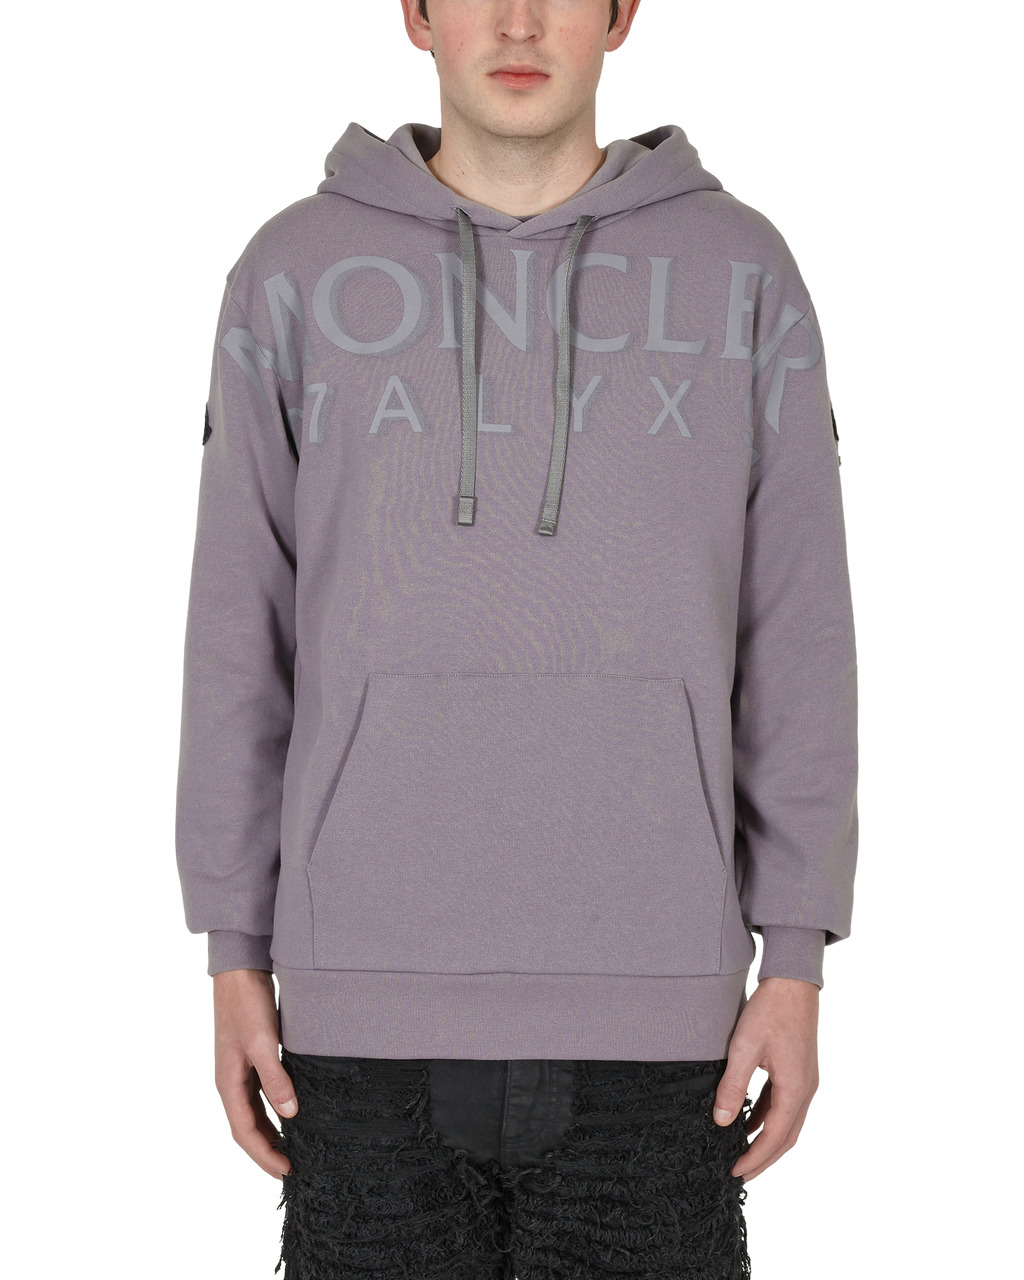 6 MONCLER 1017 ALYX 9SM HOODIE SWEATER - 2